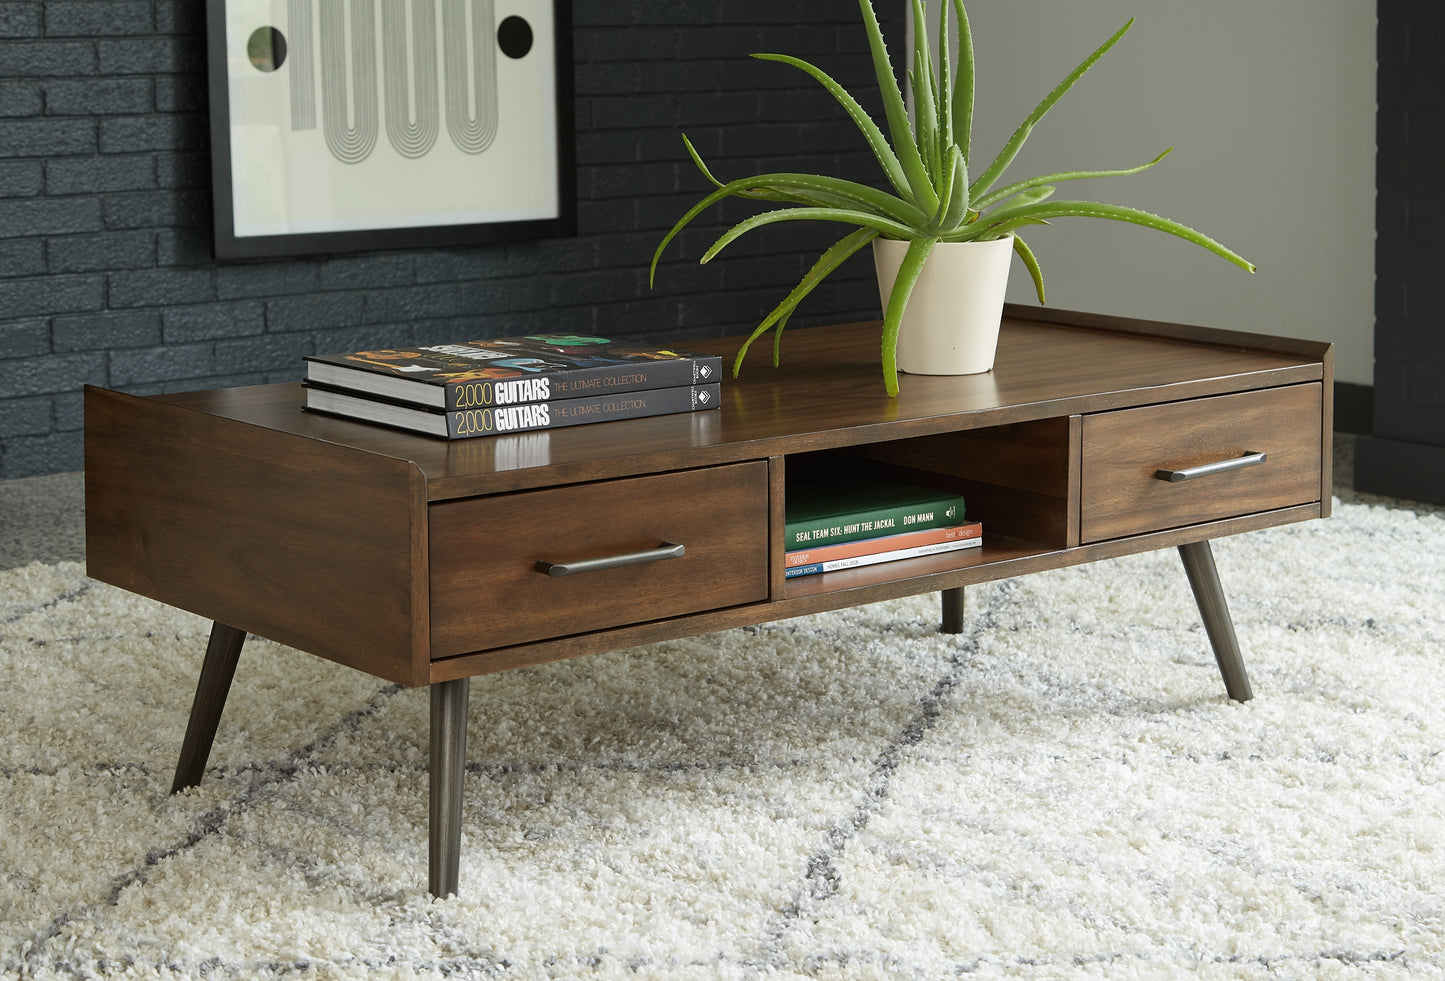 Calmoni Coffee Table with 1 End Table Wilson Furniture (OH)  in Bridgeport, Ohio. Serving Bridgeport, Yorkville, Bellaire, & Avondale